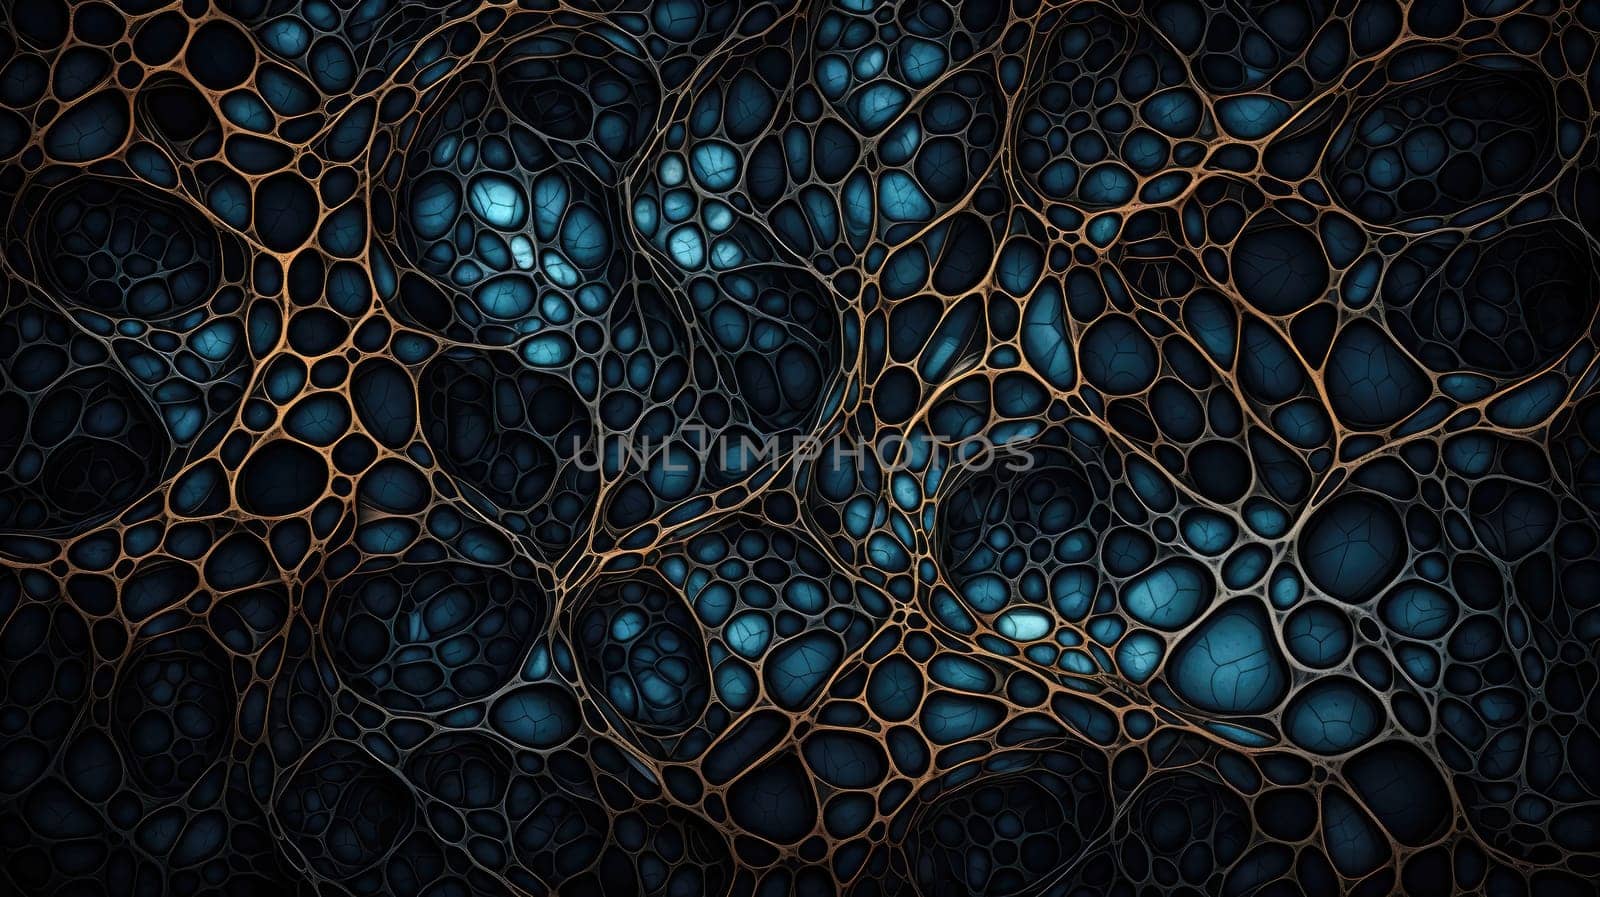 Abstract background and texture in dark cyan and indigo by palinchak